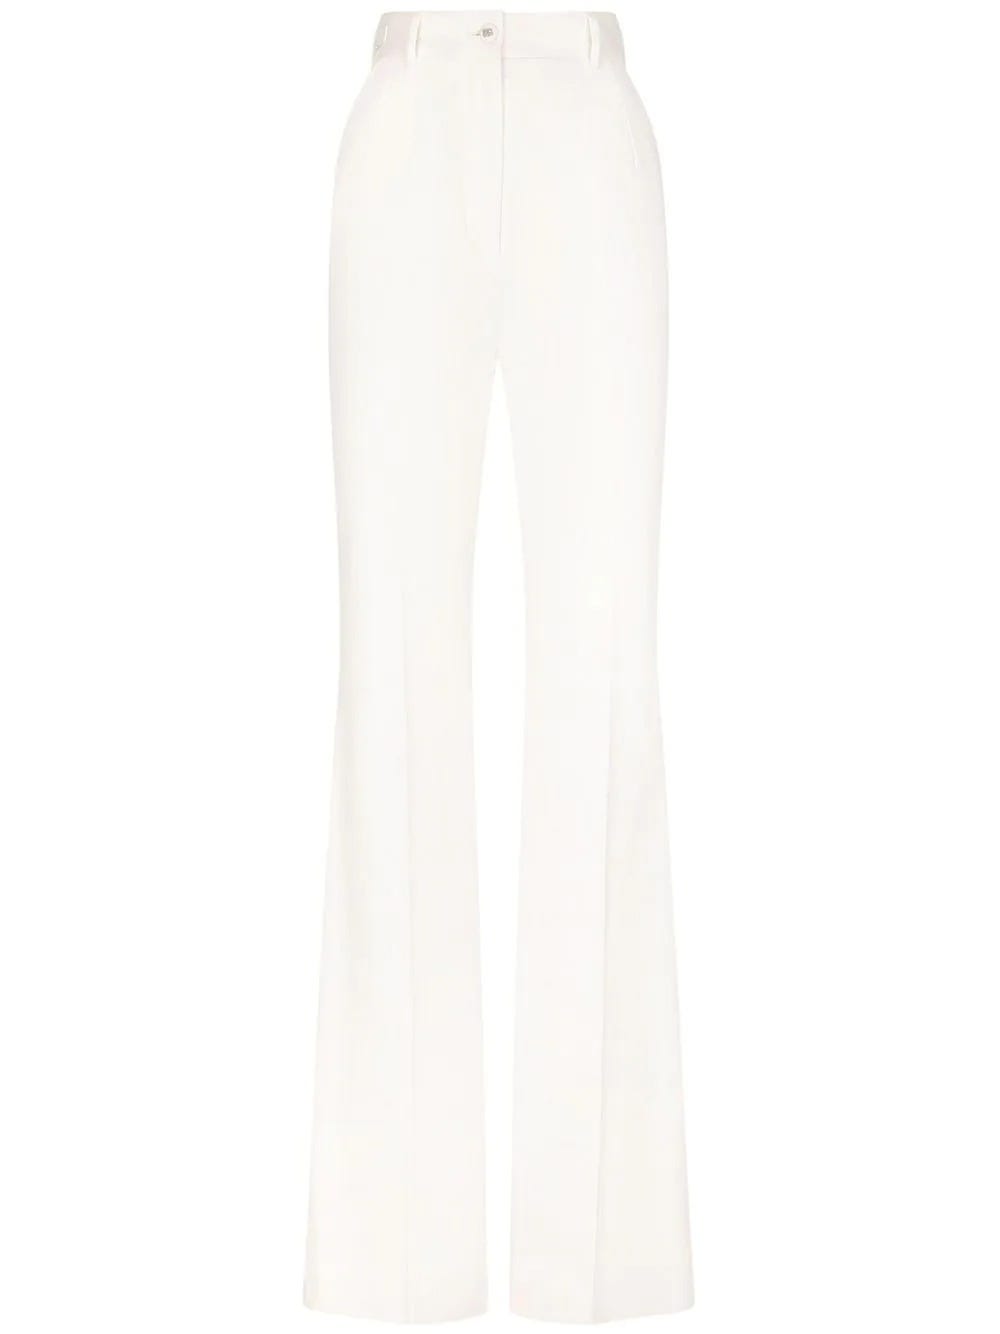 DOLCE & GABBANA WHITE TAILORED FLARED trousers